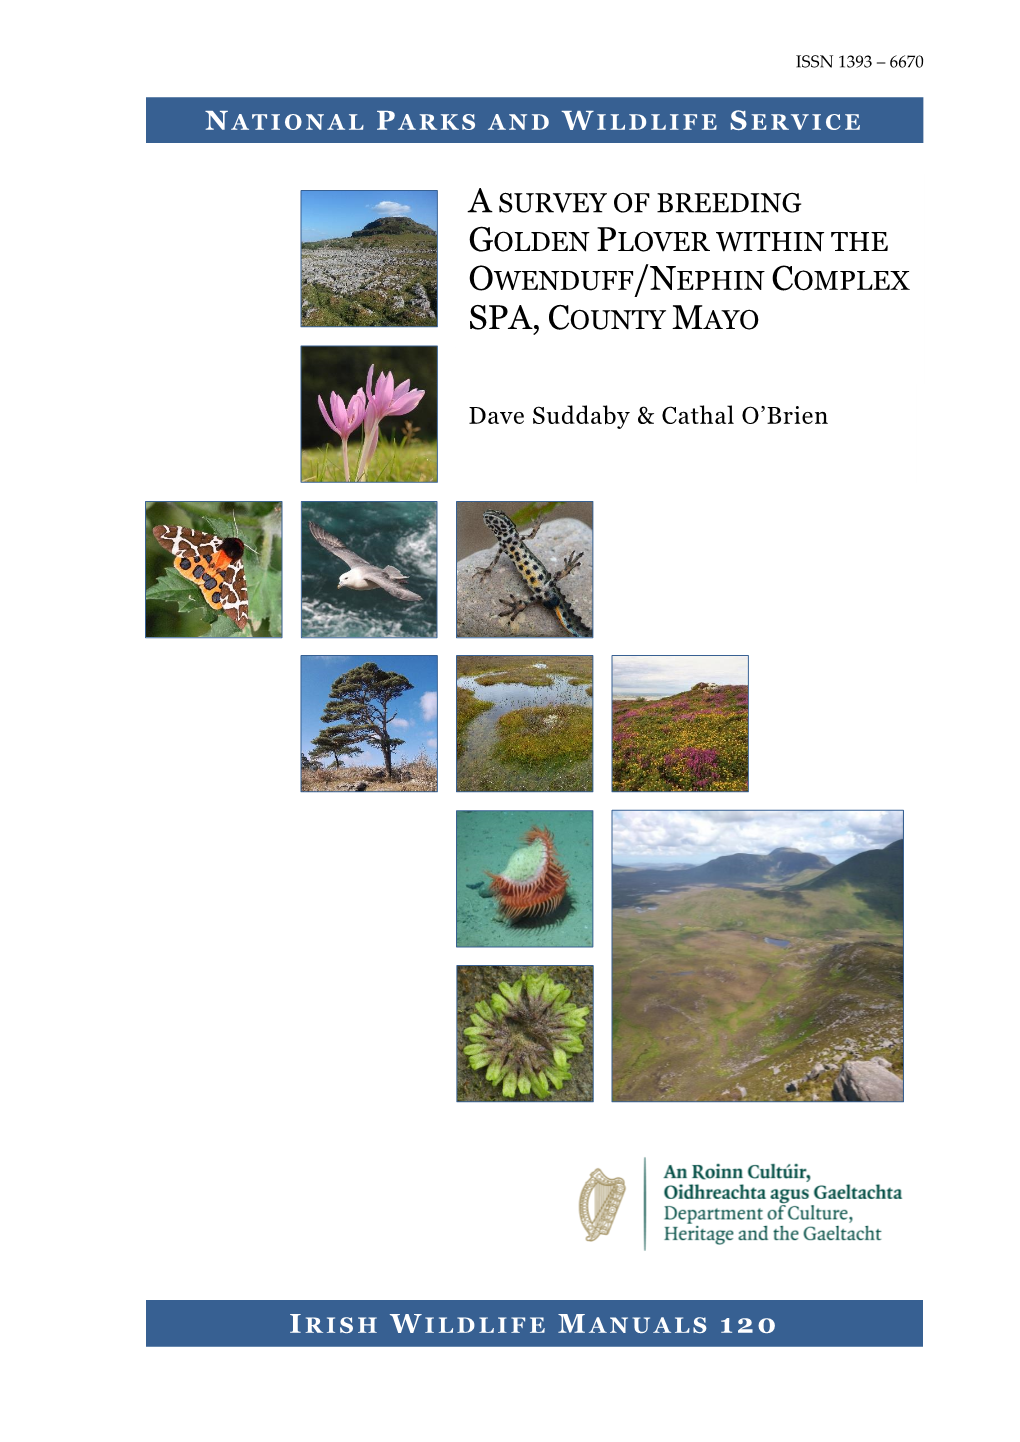 A Survey of Breeding Golden Plover Within the Owenduff/Nephin Complex SPA, County Mayo